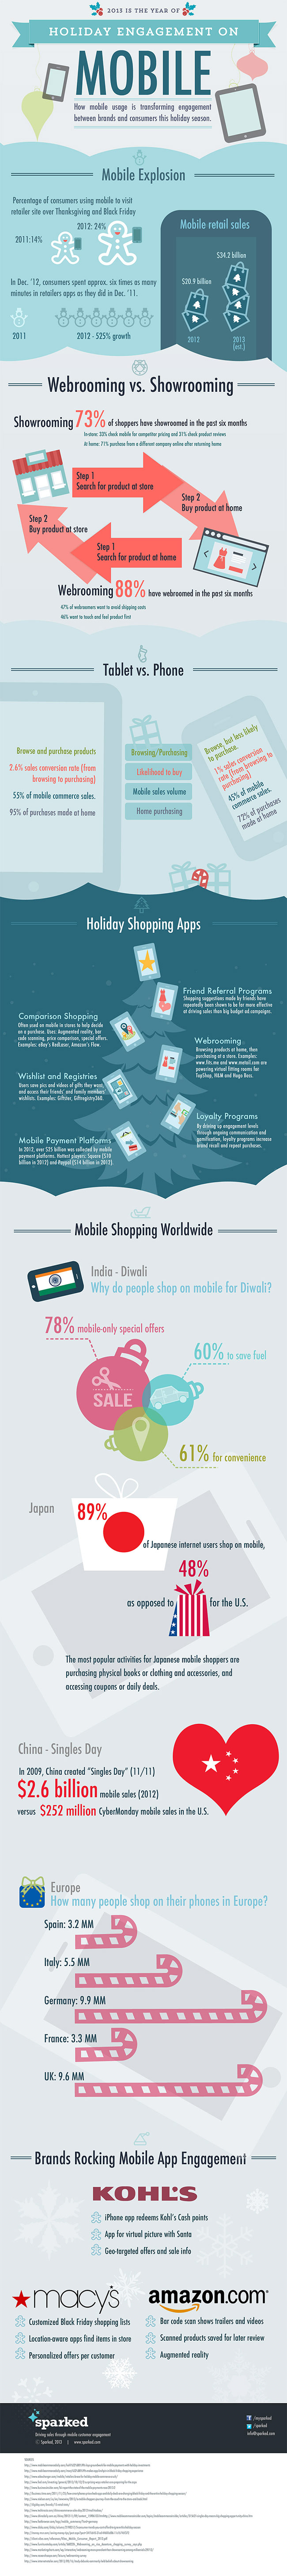 mobile-commerce-completely-exploded-infographic-pros